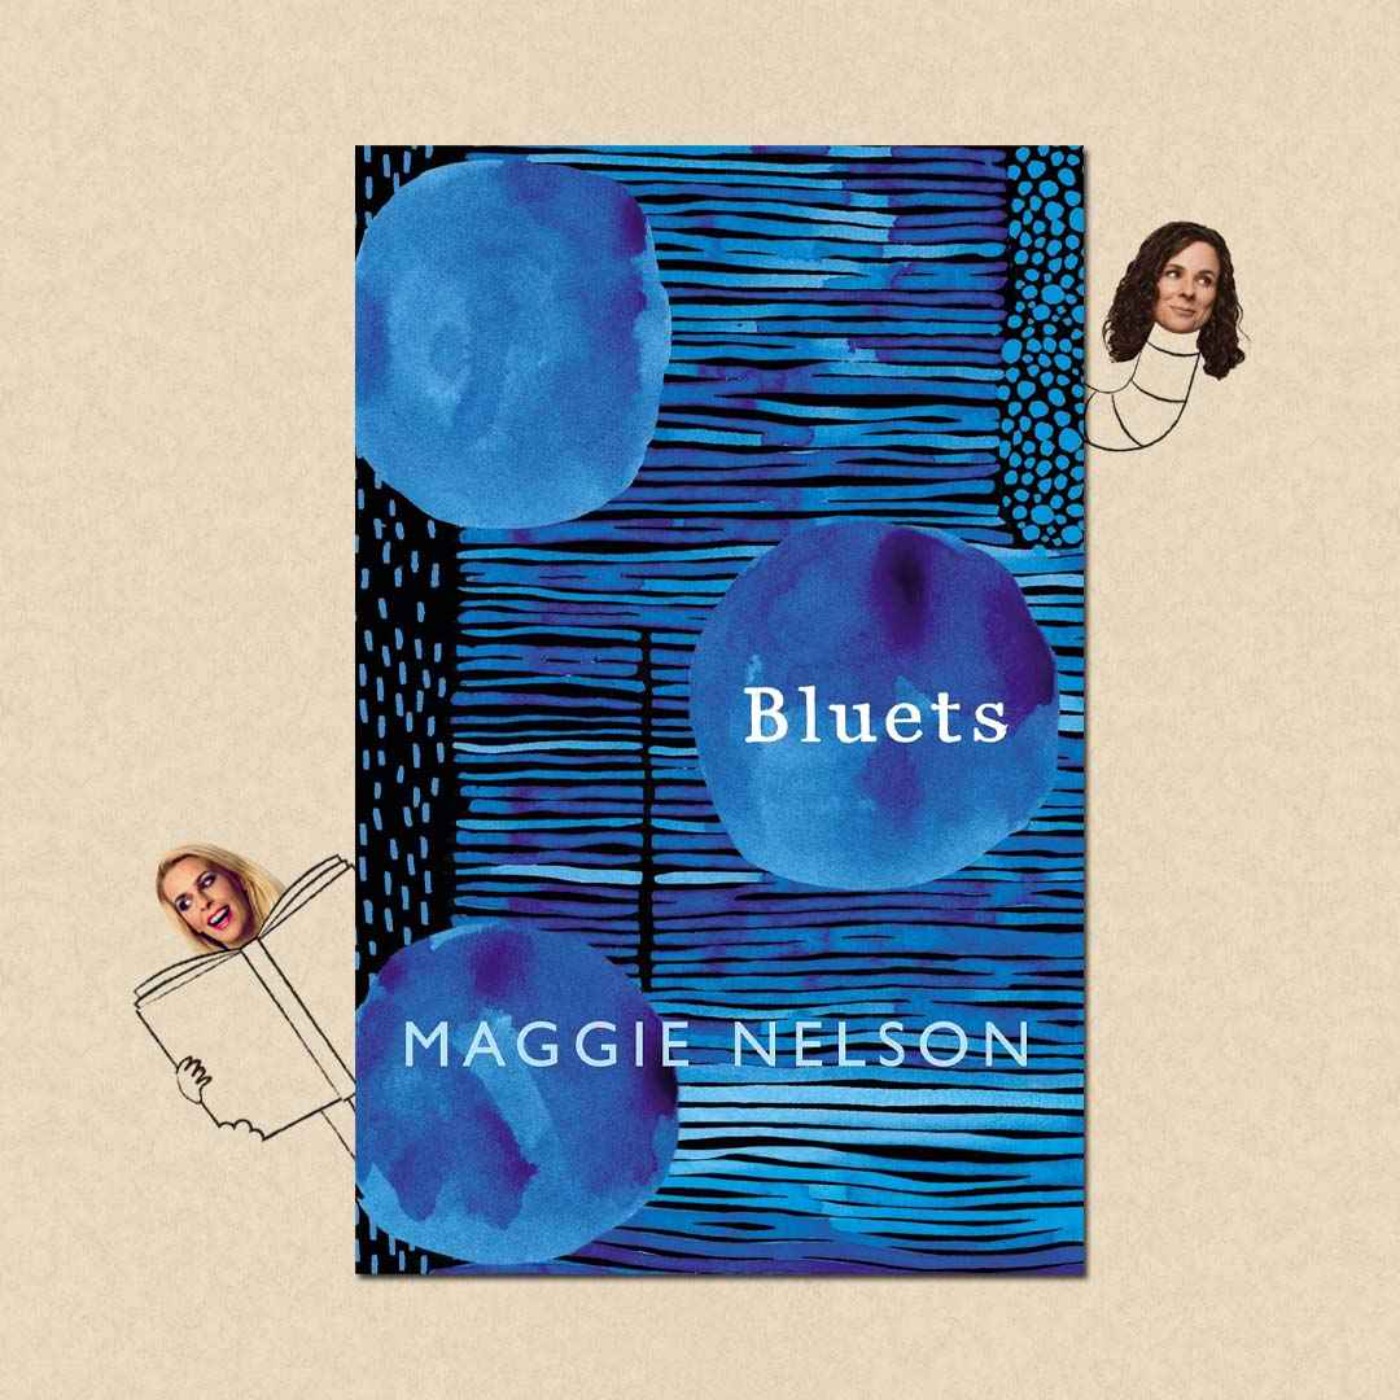 cover art for Bluets by Maggie Nelson with Katy Wix